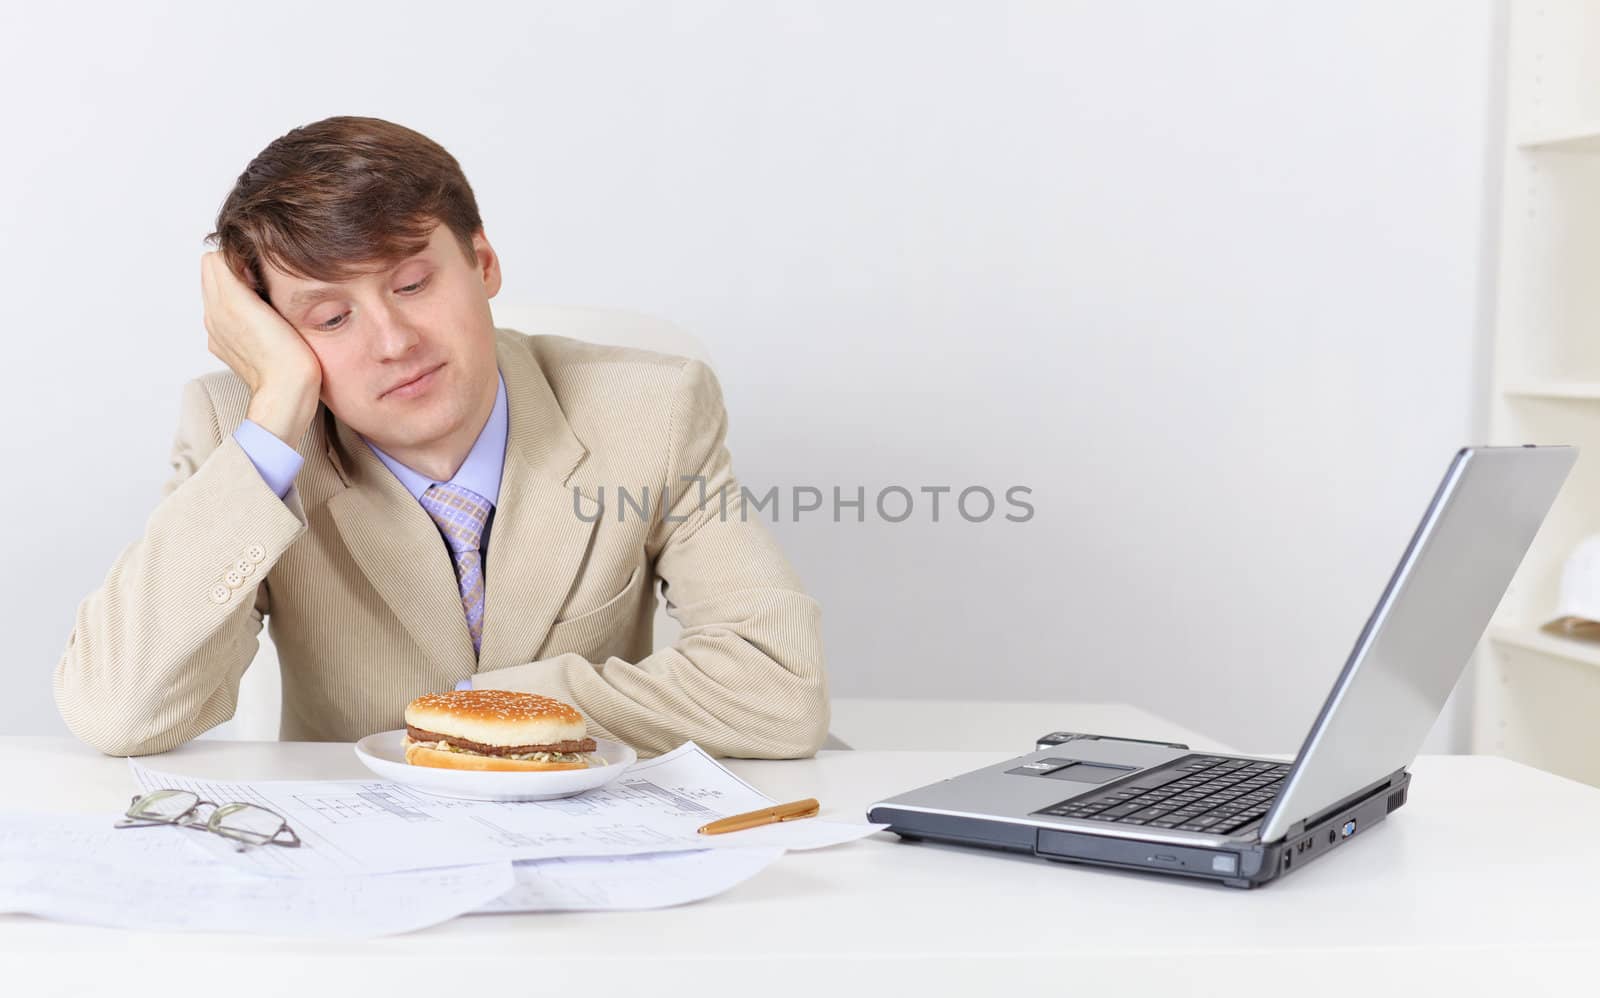 Young businessman, dreamily looking at the sandwich